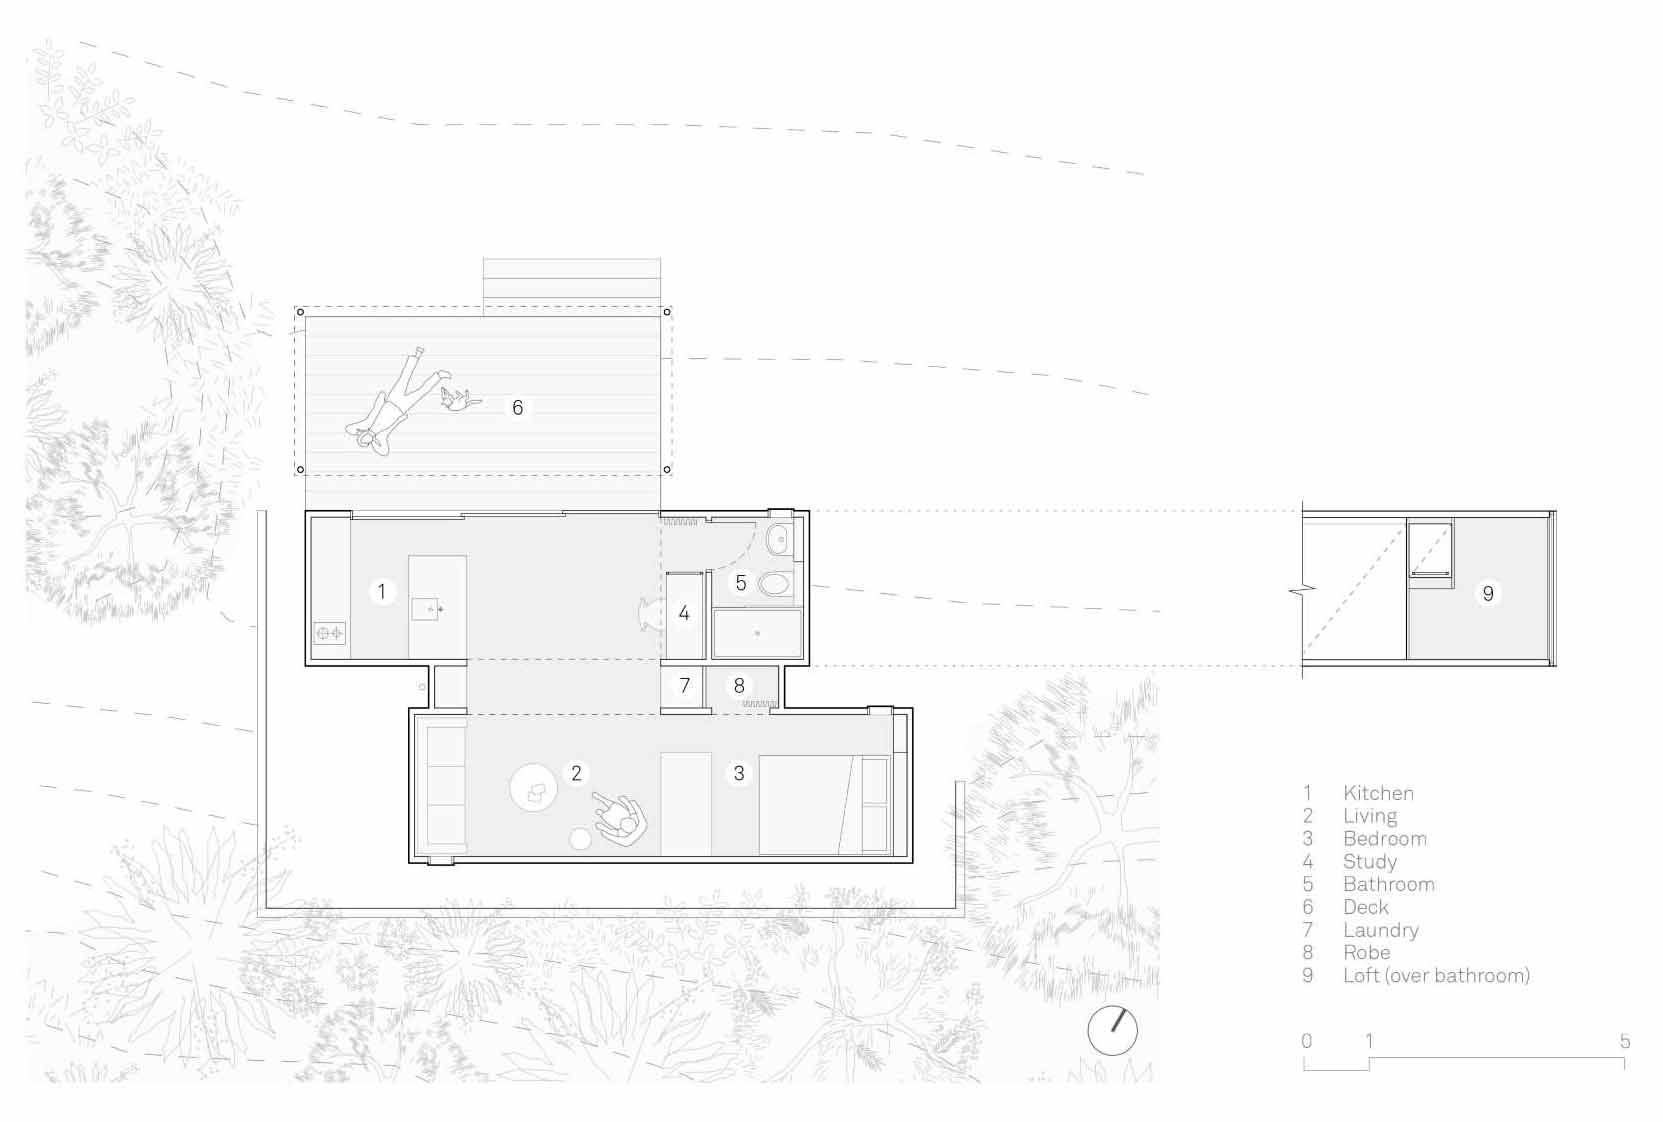 The floor plan of a small one-bedroom ،me.